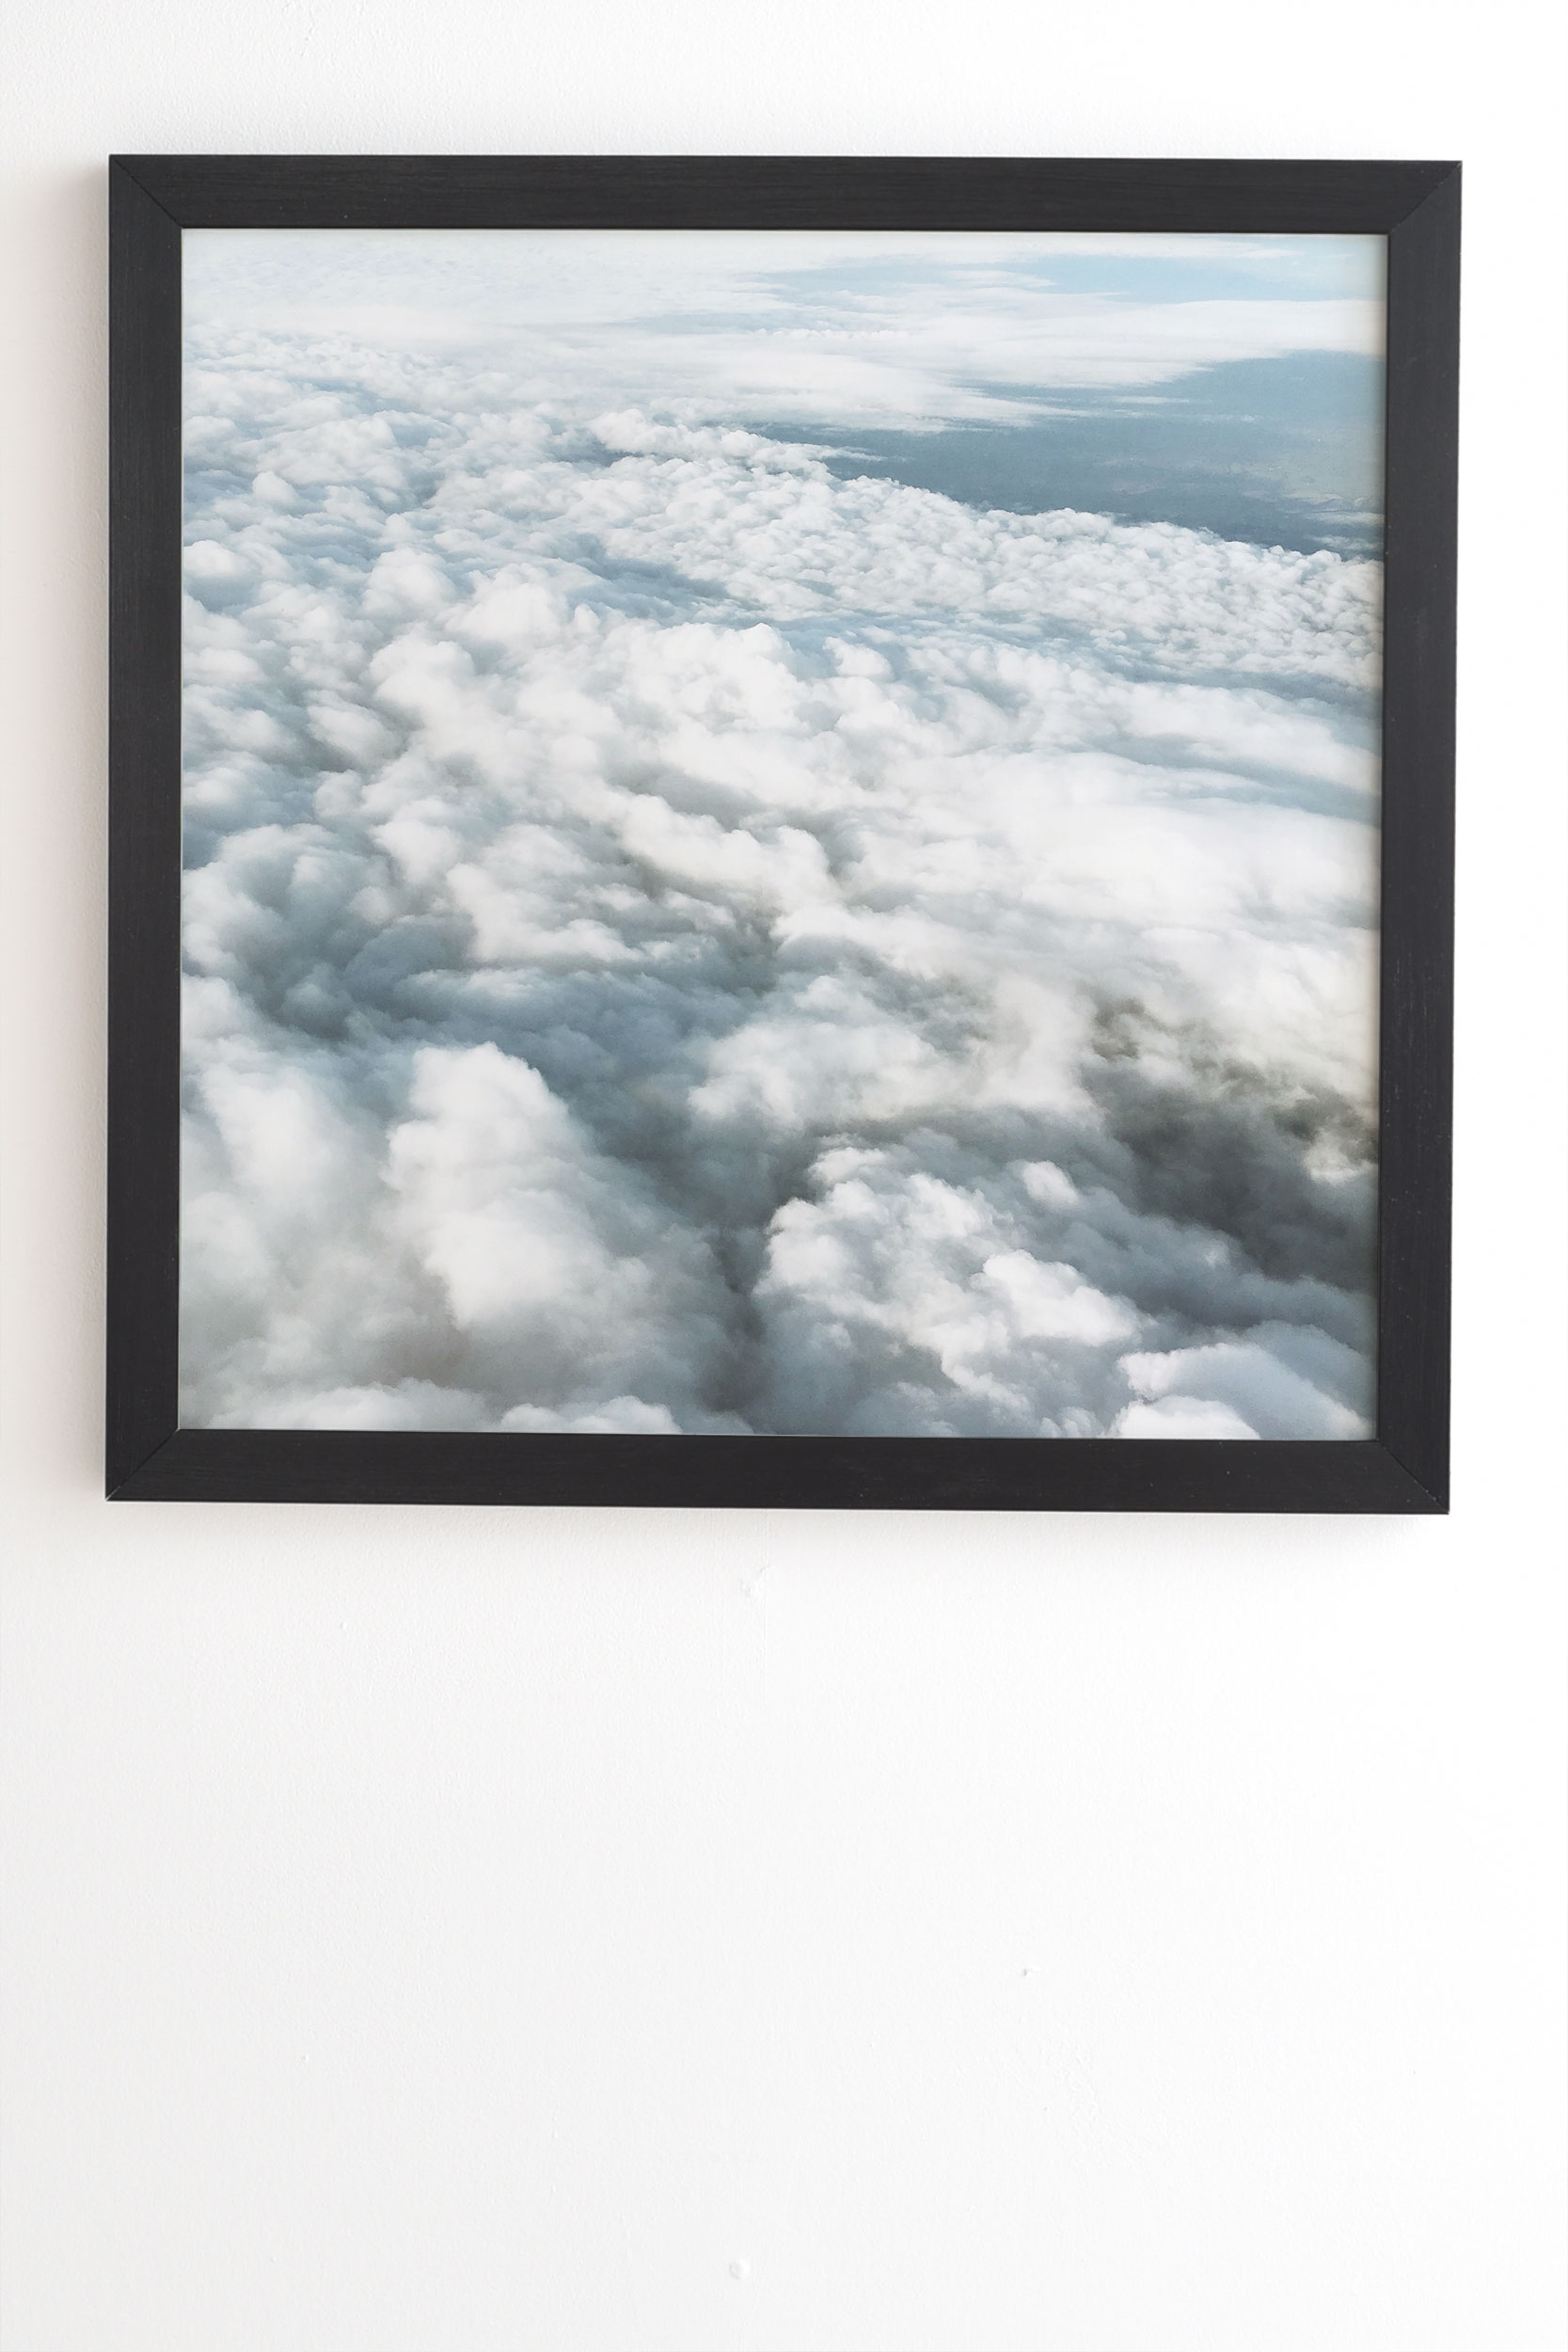 The Clouds Below by Cassia Beck - Framed Wall Art Basic Black 19" x 22.4" - Image 1